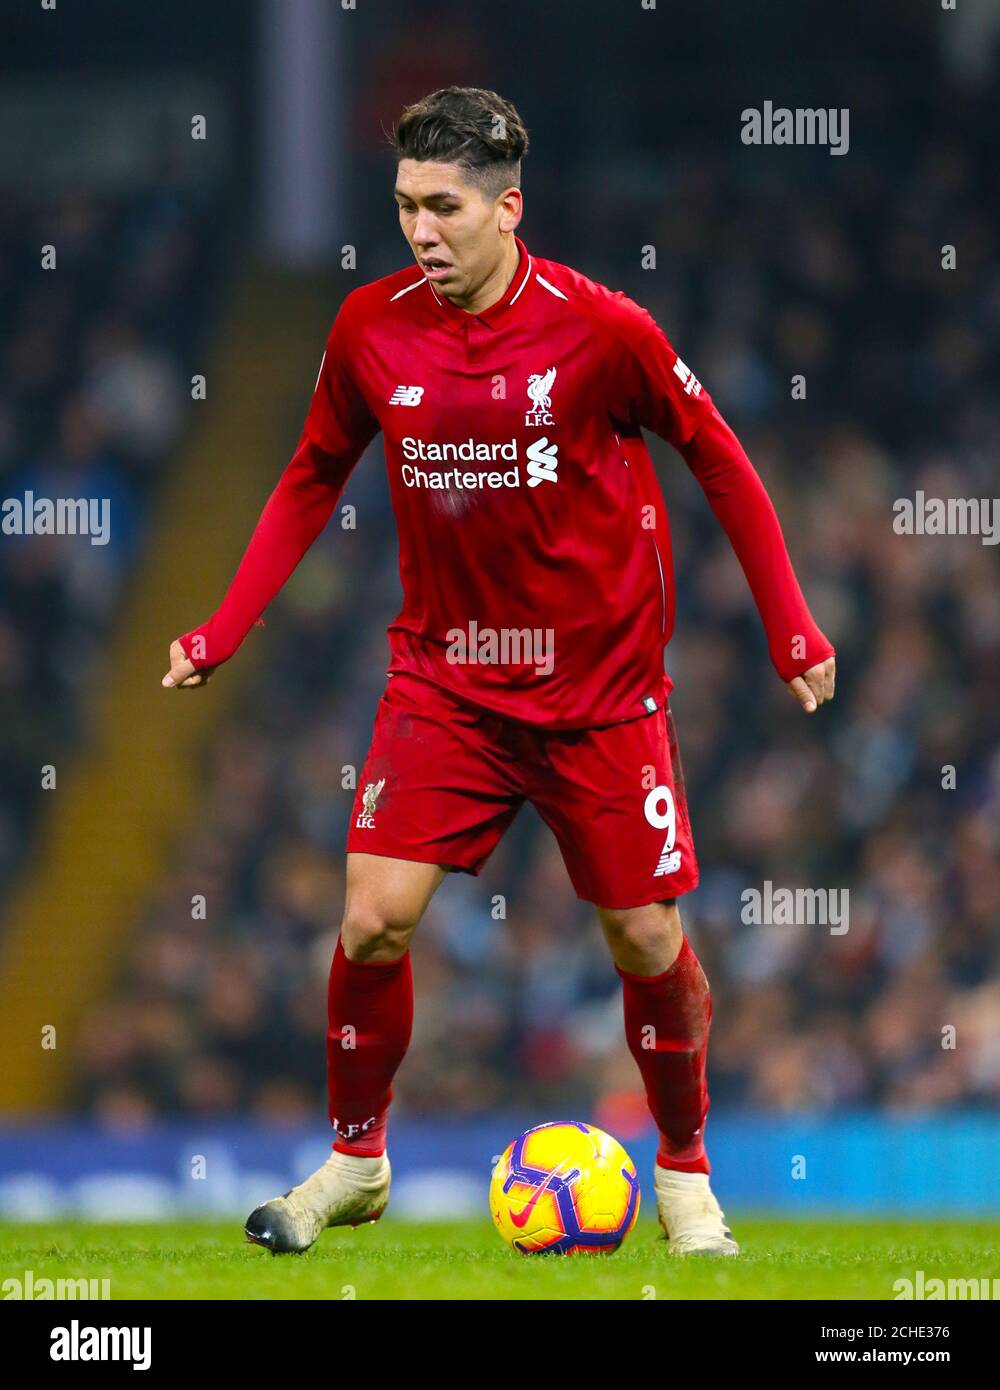 Liverpool's Roberto Firmino during the Premier League match at the Etihad Stadium, Manchester. Stock Photo